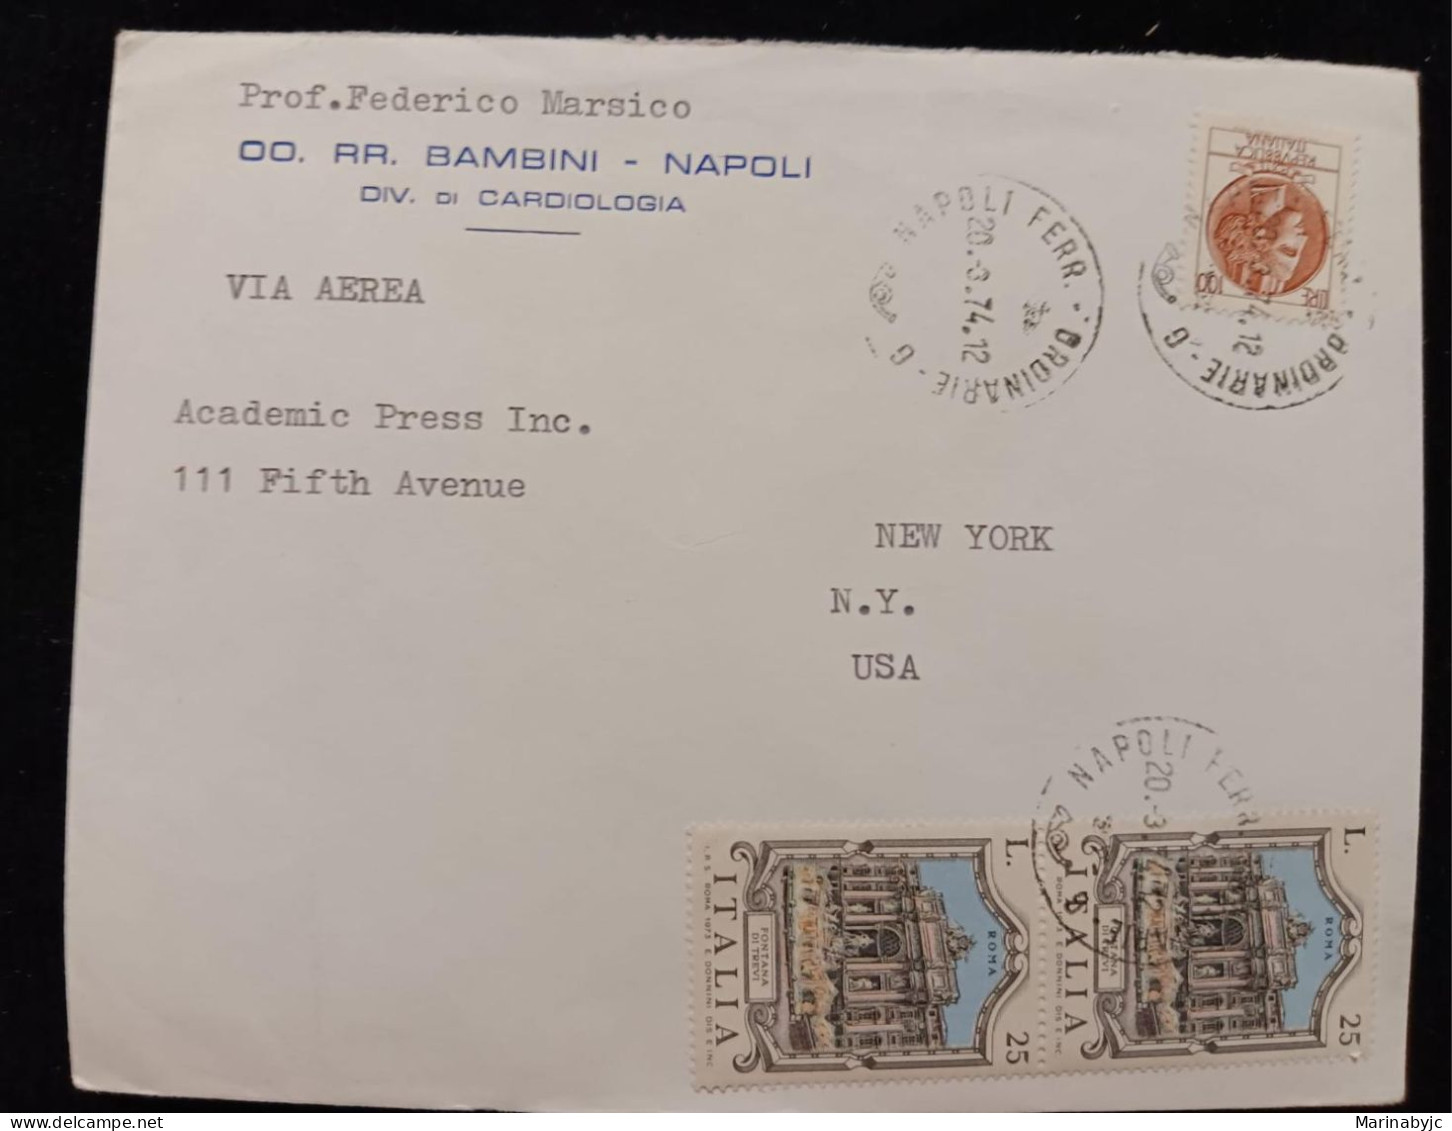 C) 1974. ITALY. AIRMAIL ENVELOPE SENT TO USA. MULTIPLE STAMPS. XF - Europe (Other)